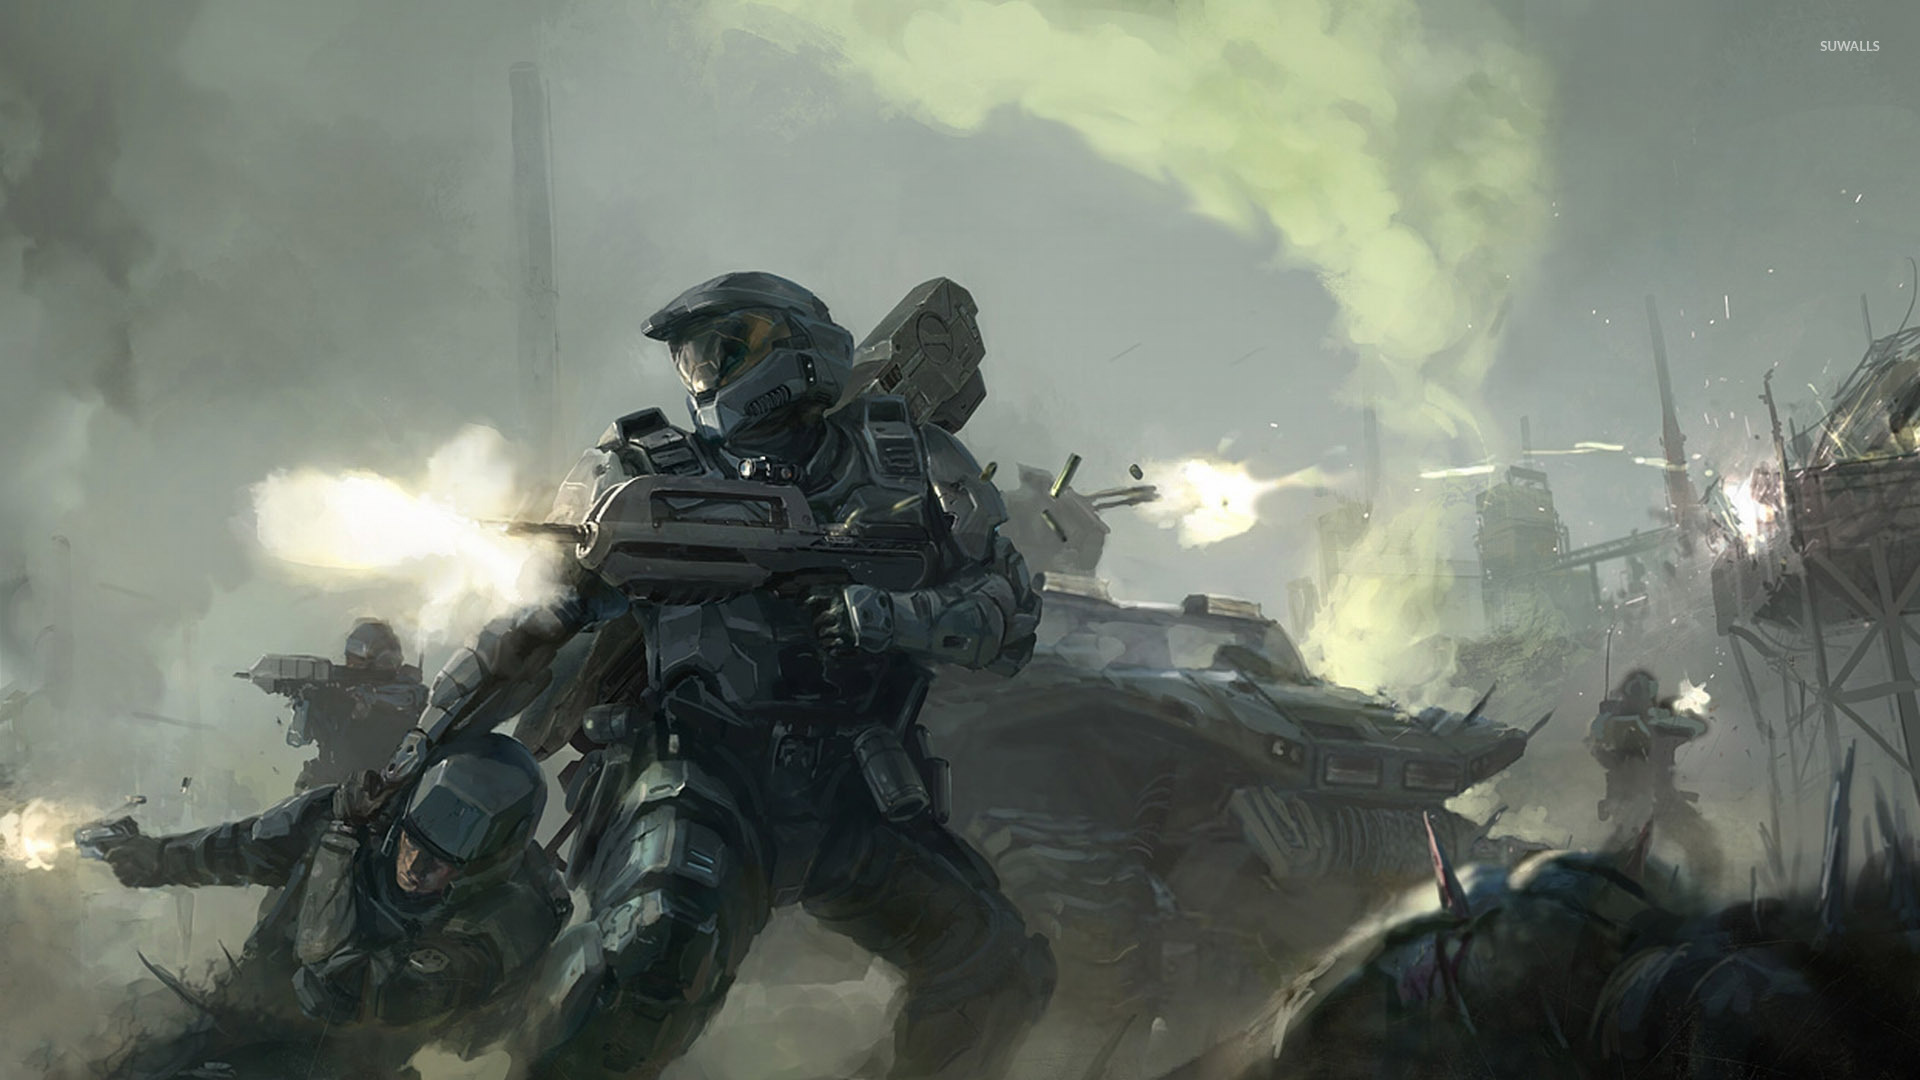 Halo wallpaper - Game wallpapers - #34357